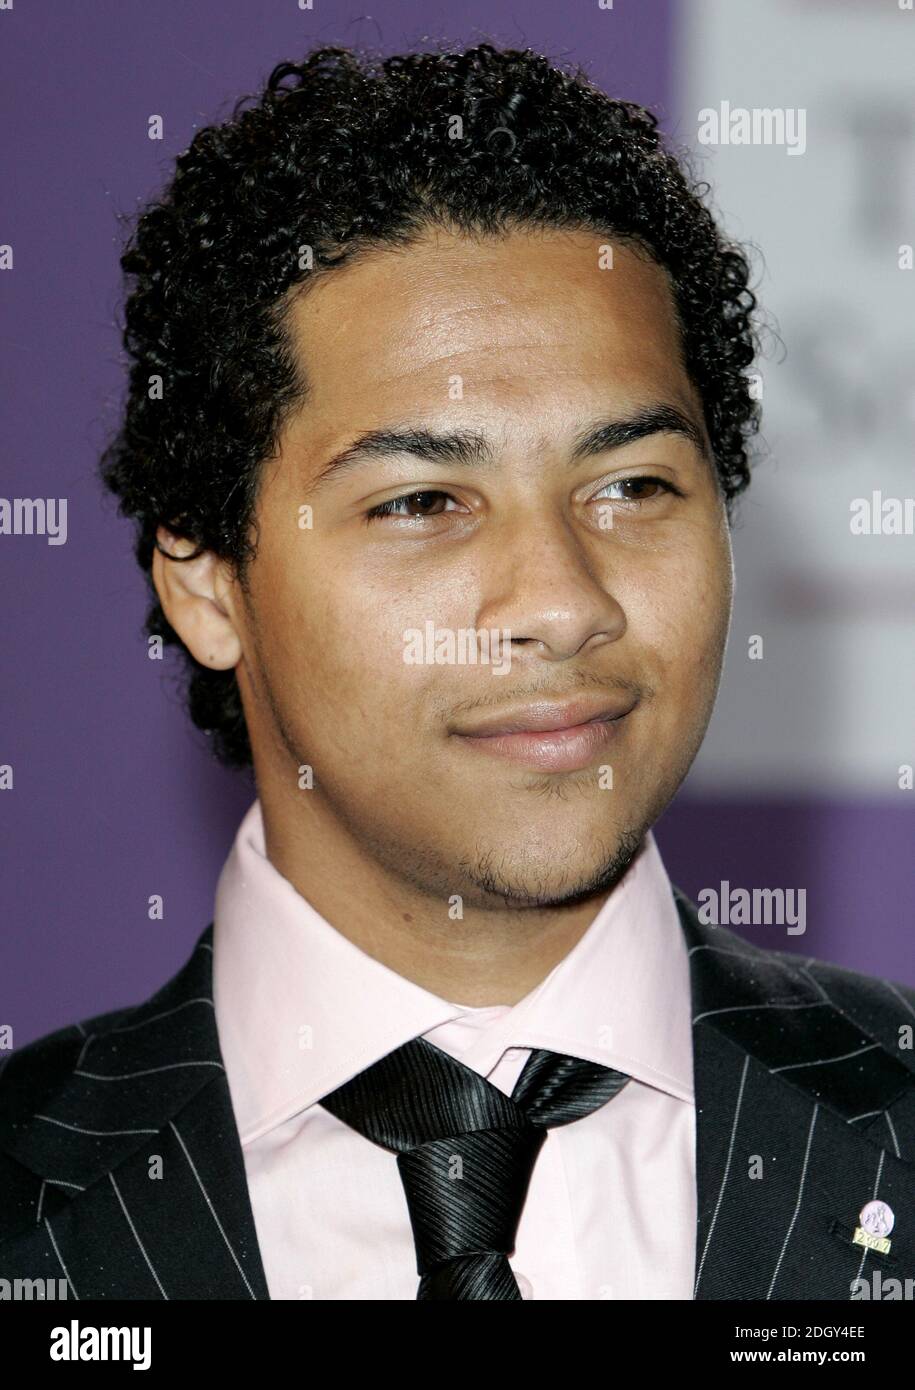 Hollyoaks actor Devon Anderson arriving for the British Soap Awards 2007, at the BBC Television Centre, west London on 26/05/2007. Stock Photo